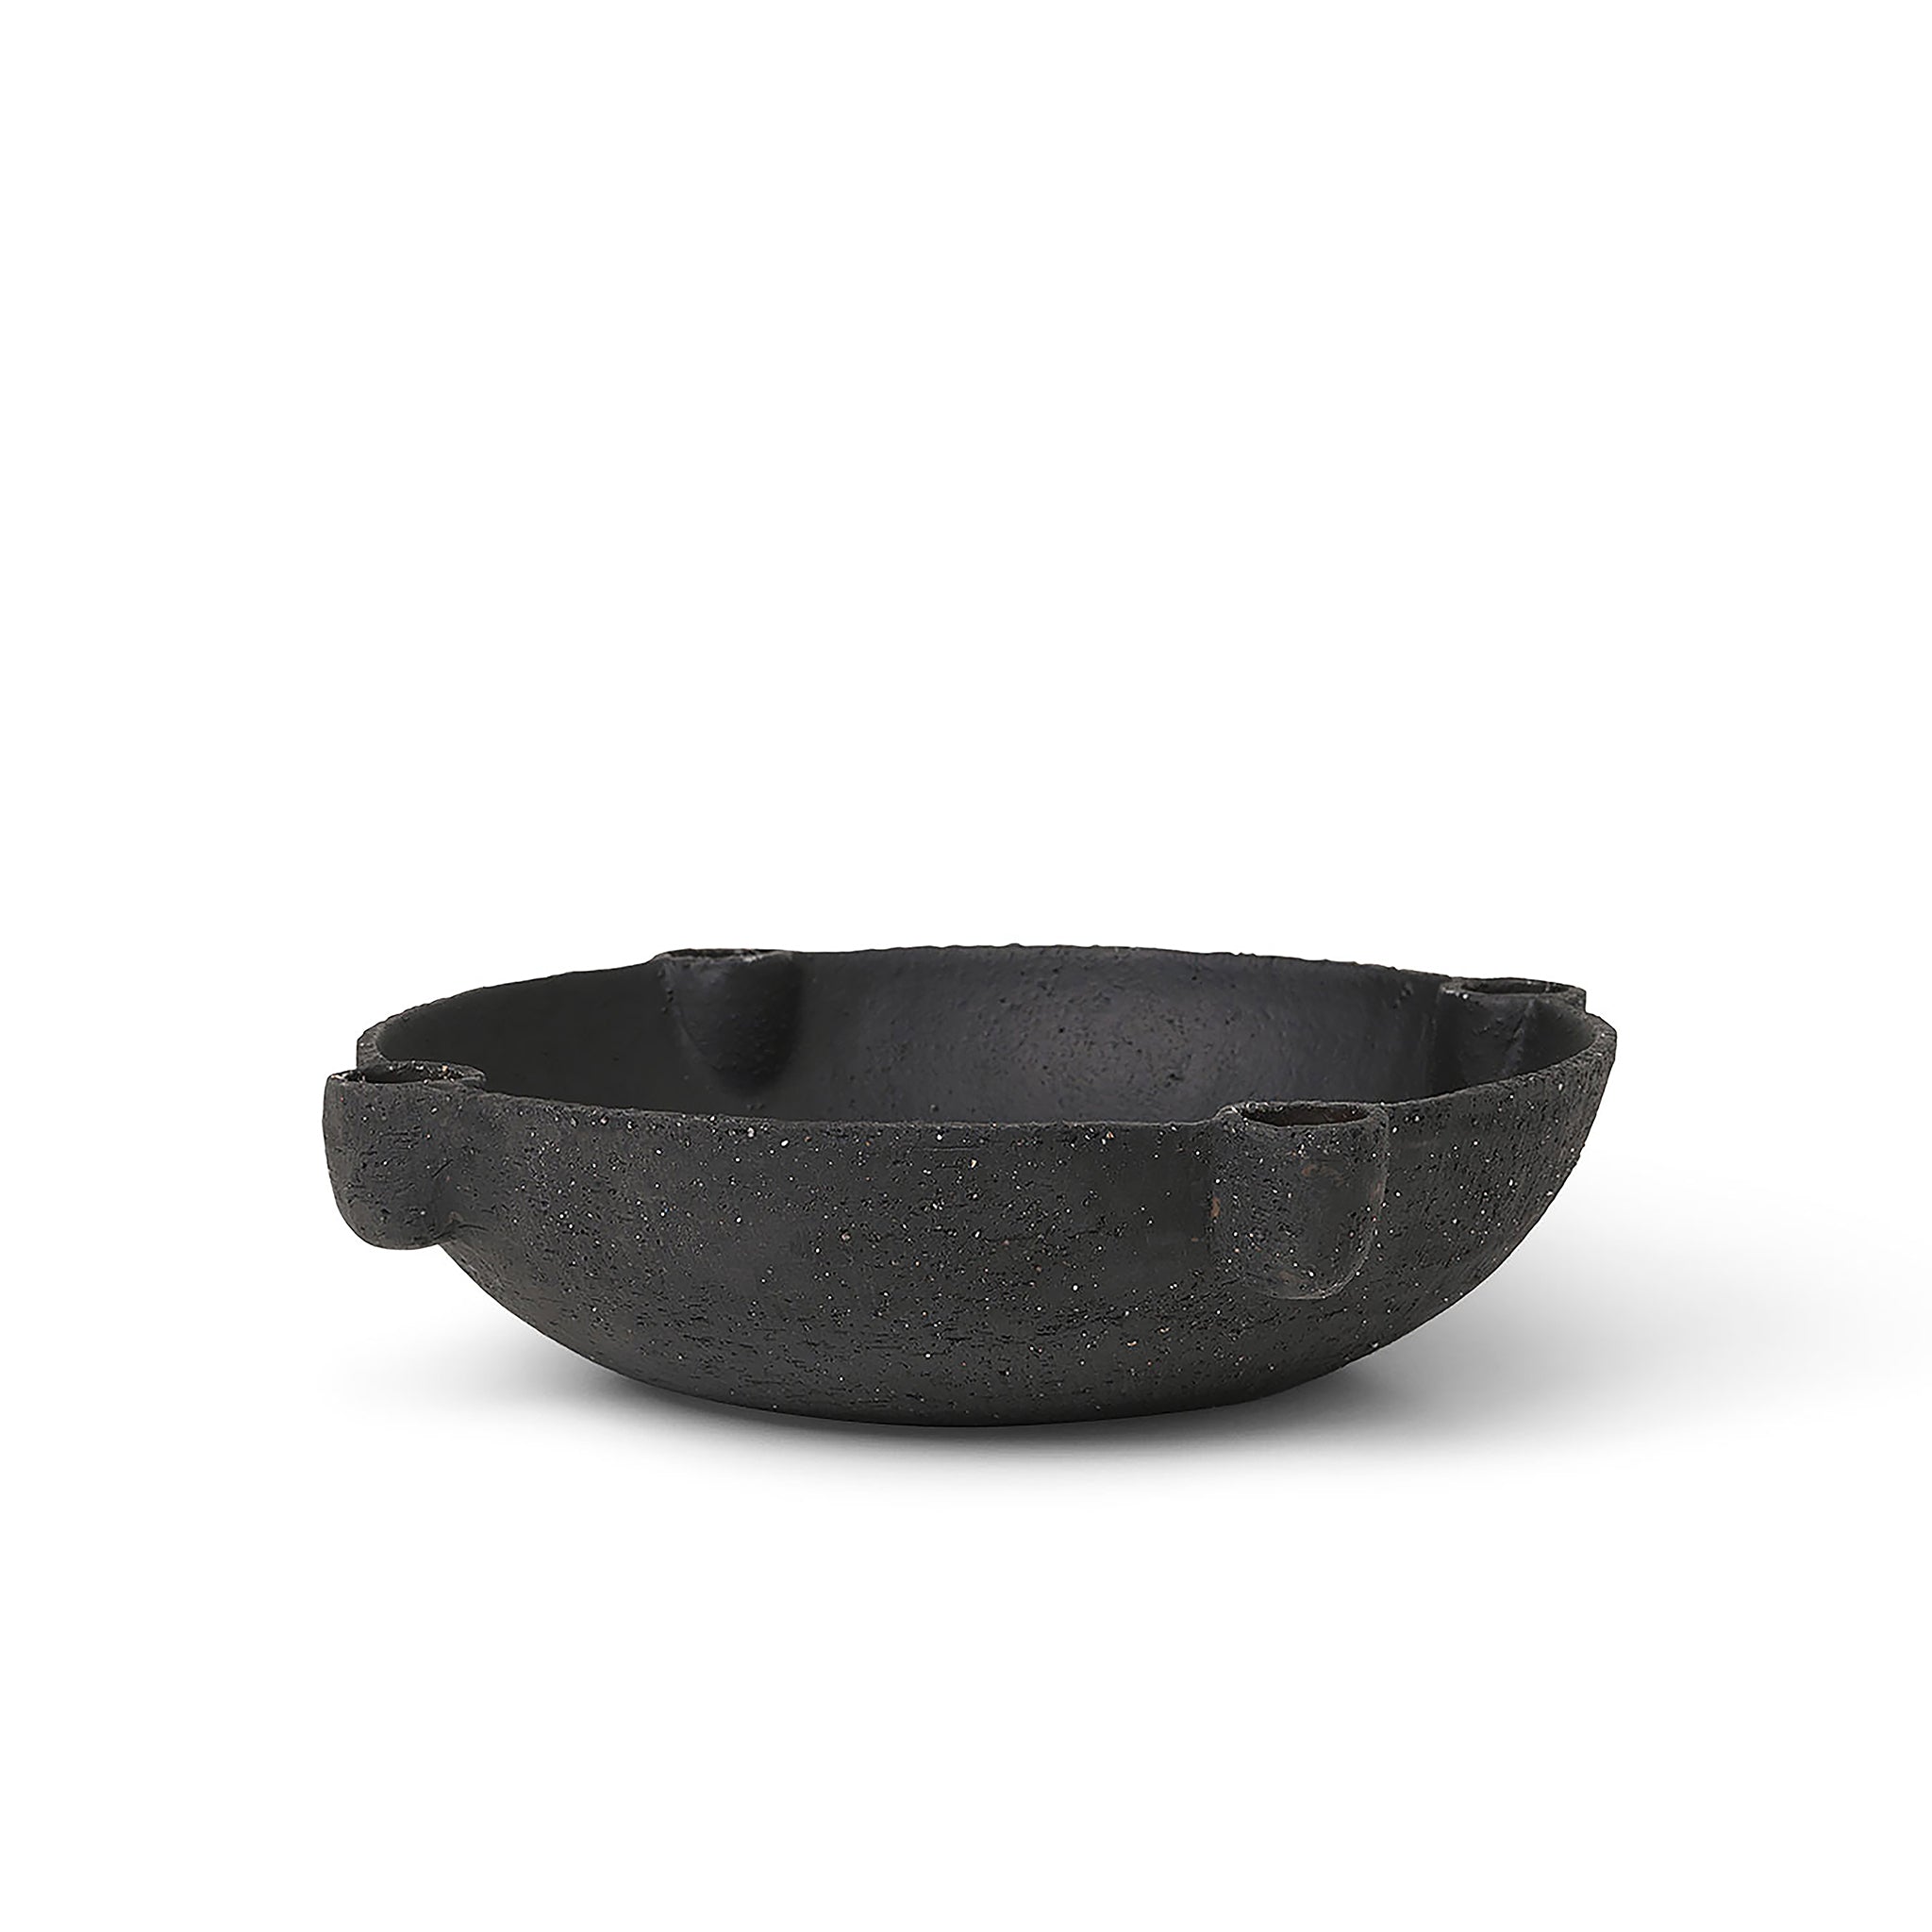 Bowl Candle Holder - Large Ceramic by Ferm Living